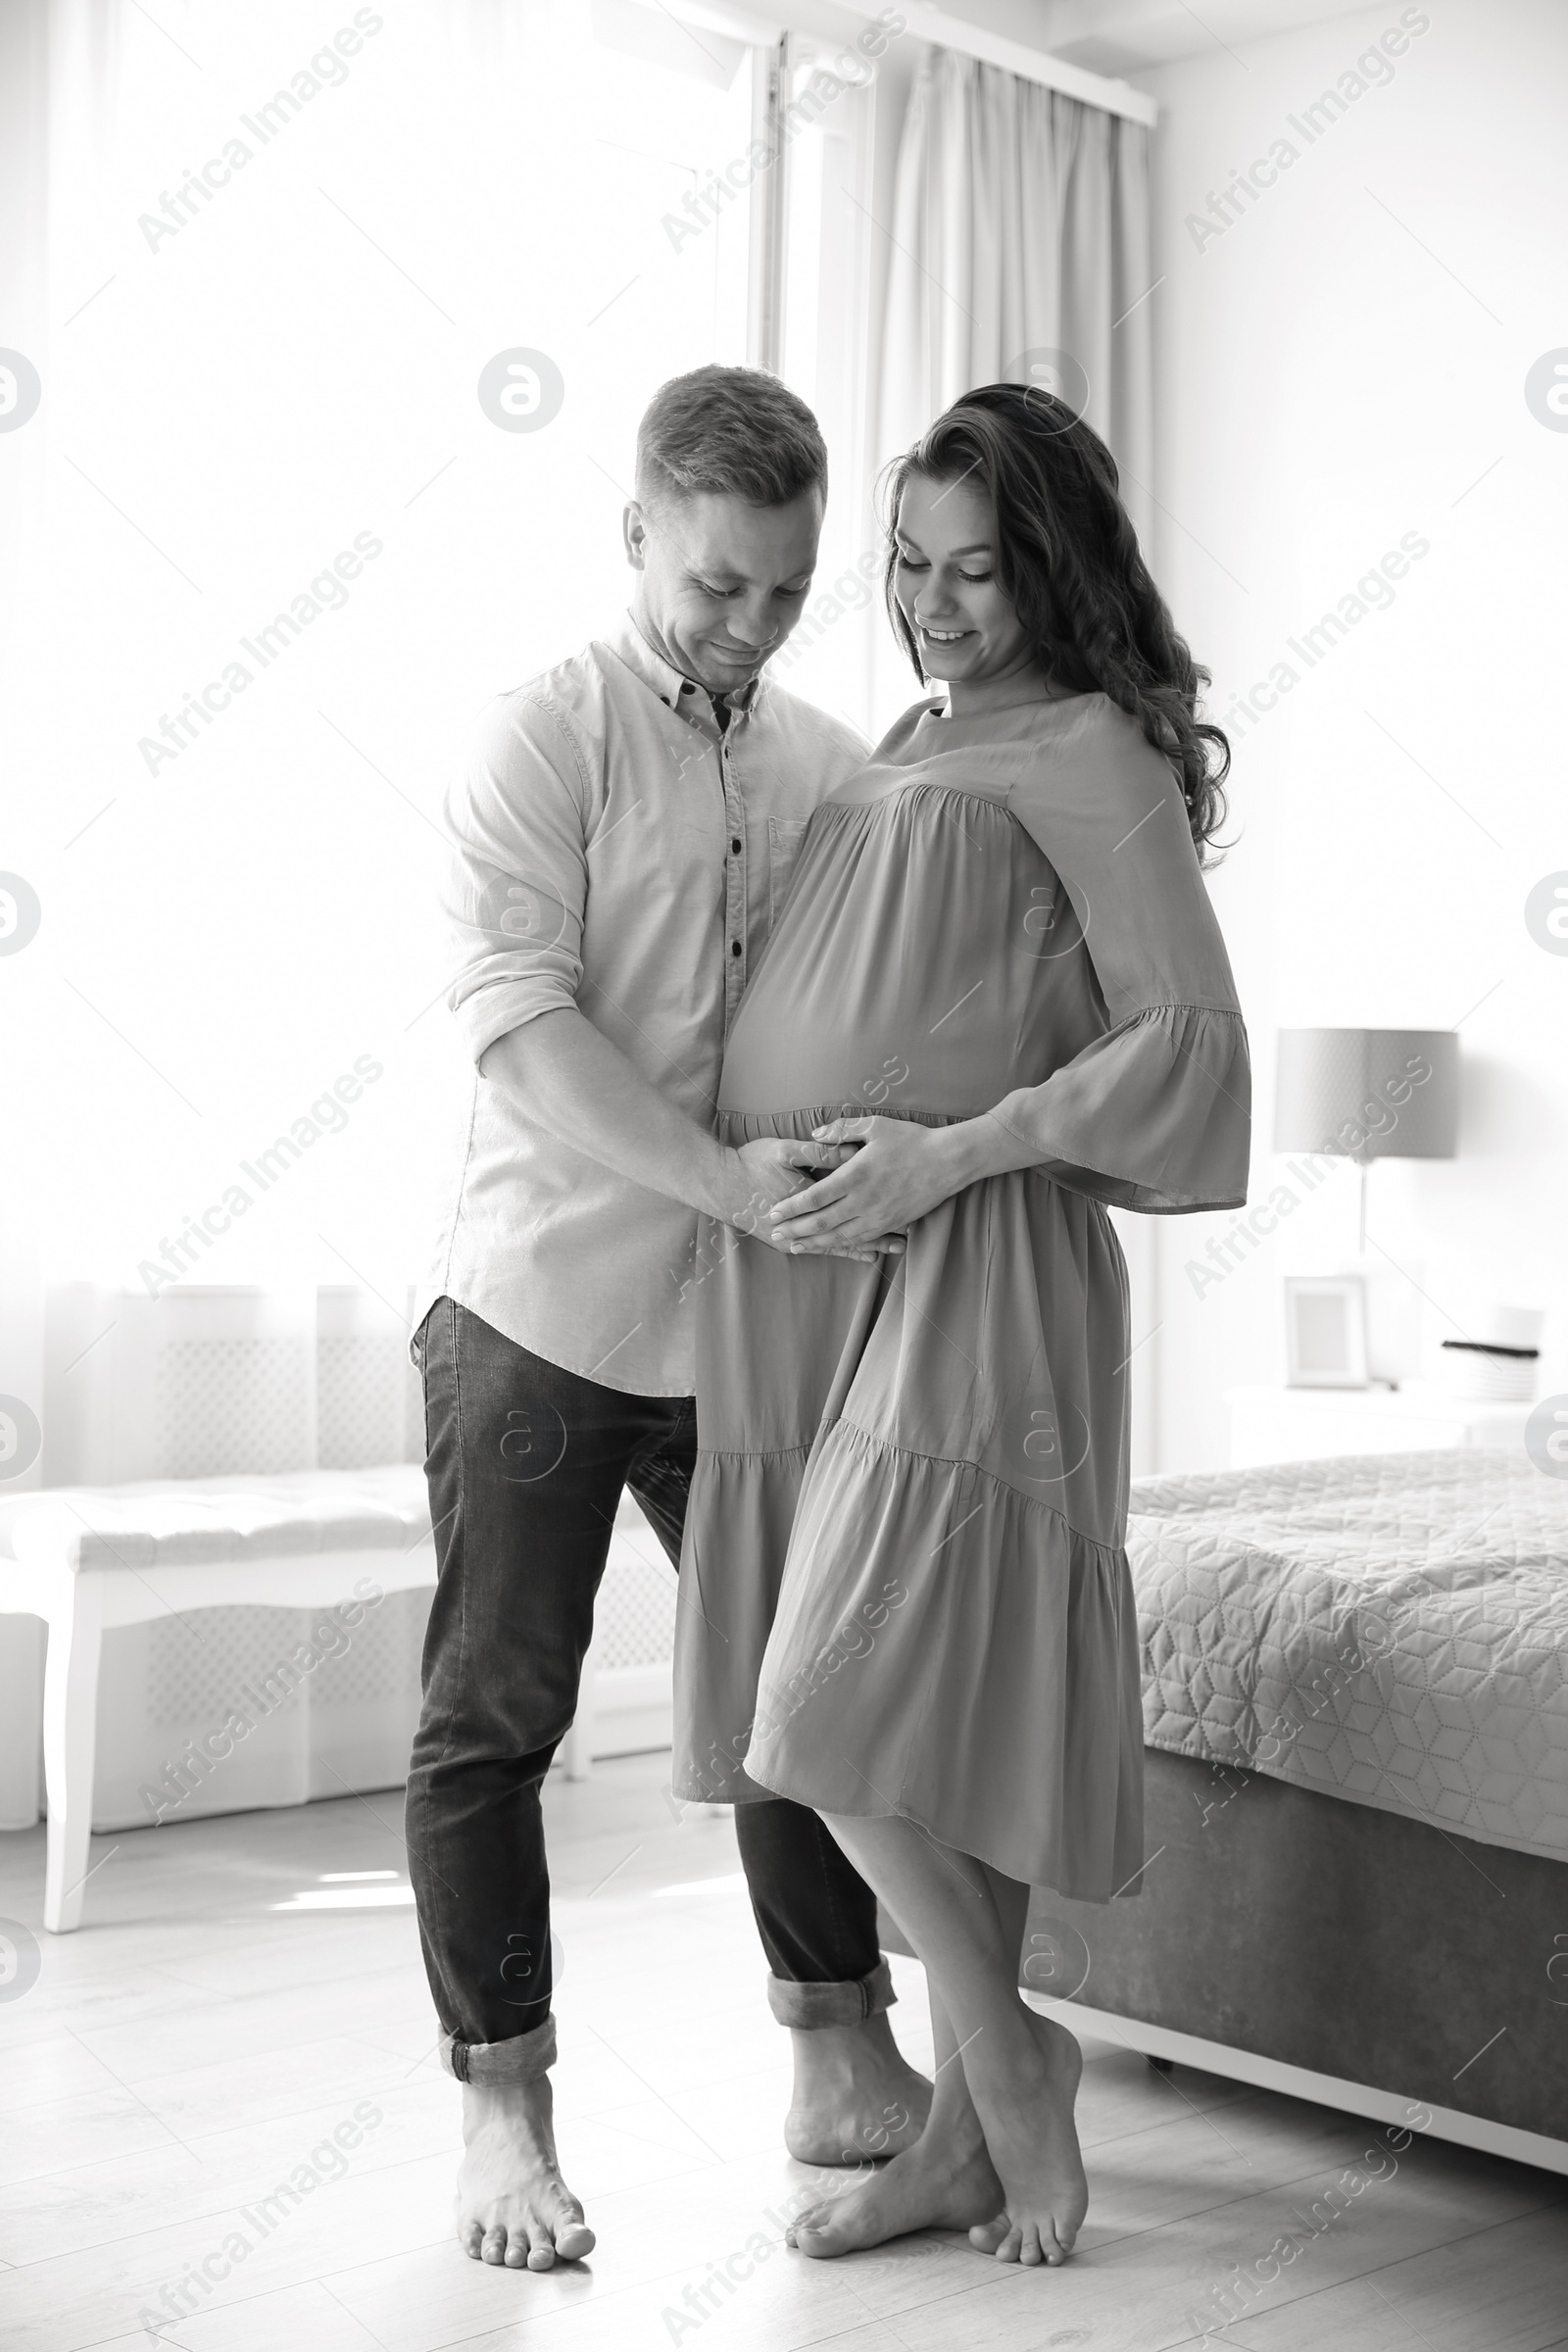 Photo of Pregnant woman with her husband in bedroom, black and white effect